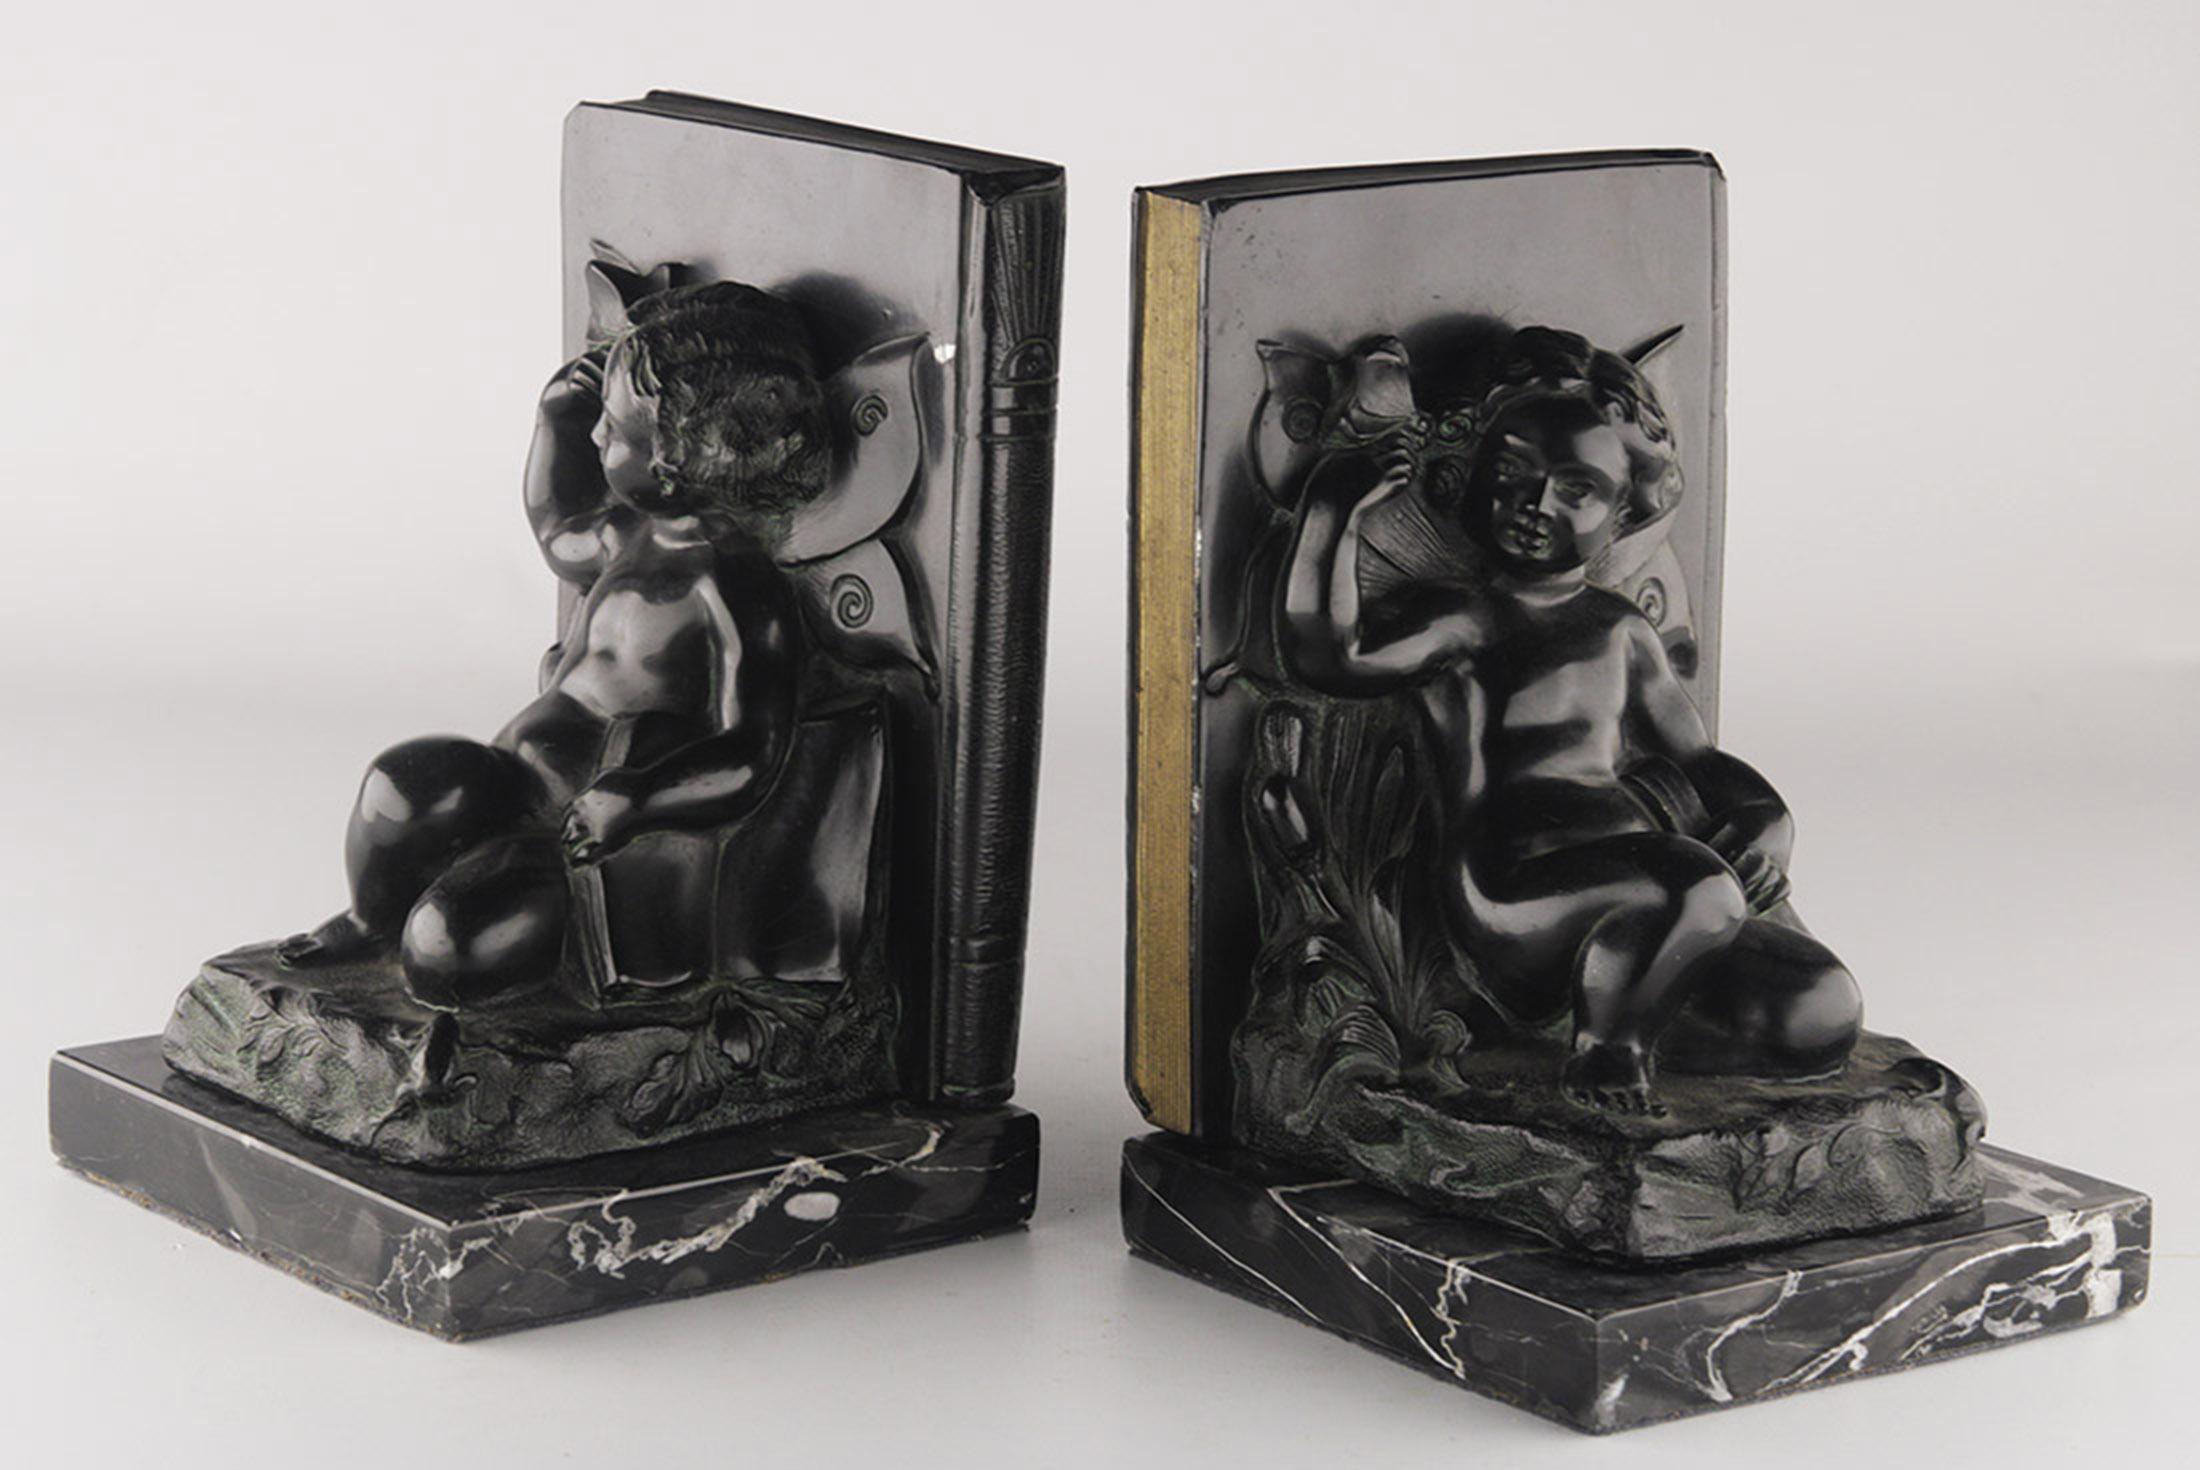 Set of early 20th century french Art Déco zamac winged cherub/fairy child bookends with marble base

By: unknown
Material: aluminum, bronze, marble, metal, zinc, copper
Technique: cast, polished, metalwork, patinated
Dimensions: 5 in x 5 in x 7